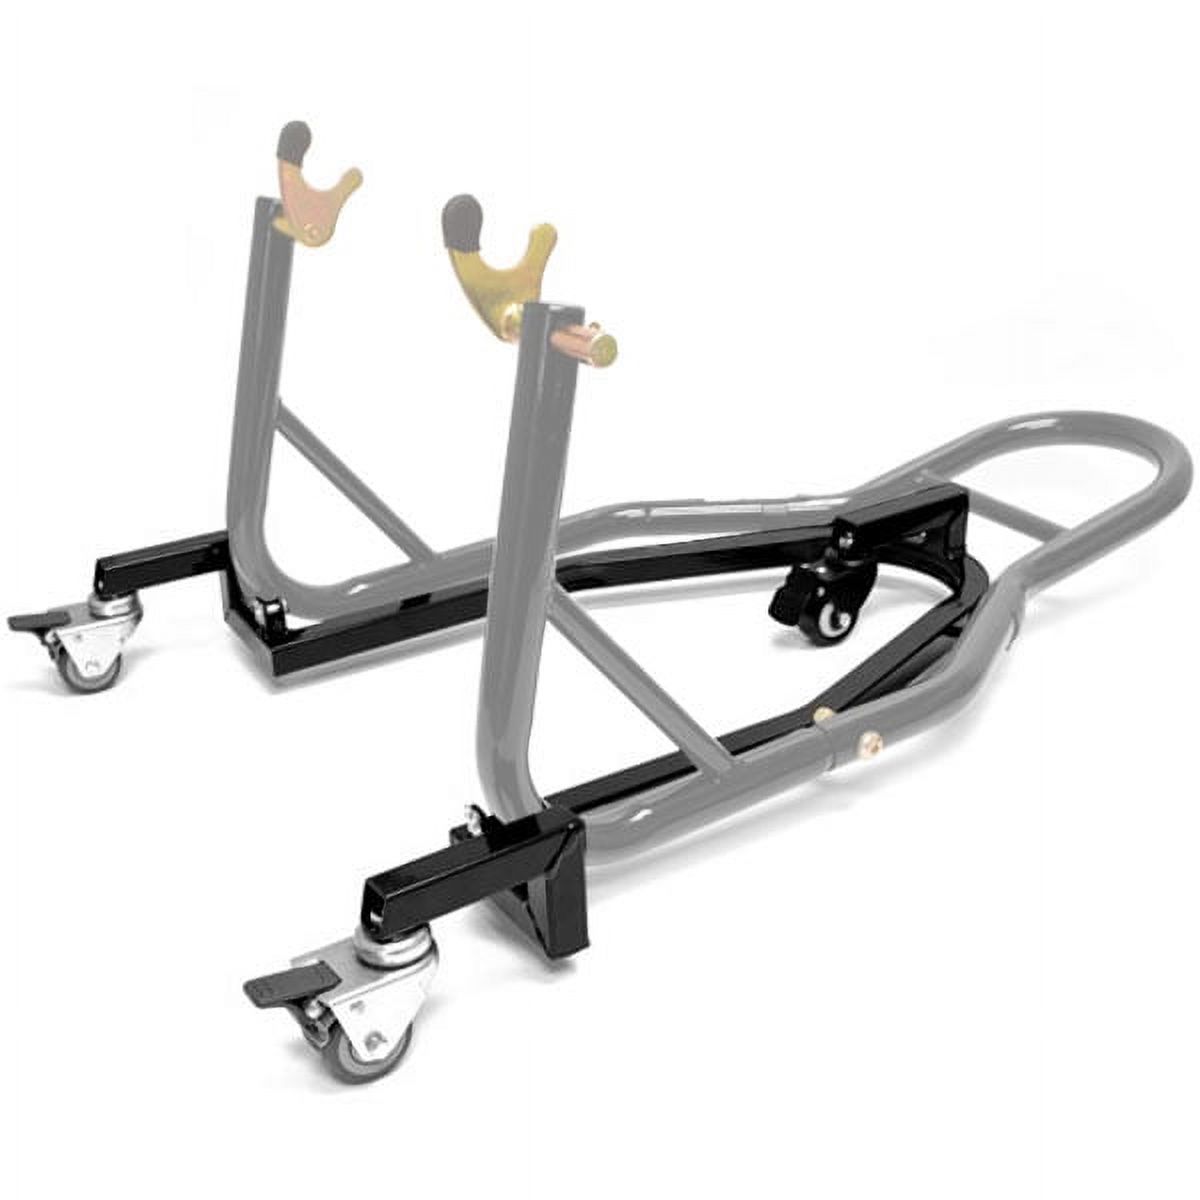 Venom Motorcycle Trolley Rear Lift Stand Attachment Compatible with Honda CMX 250 450 Rebel Fury - image 3 of 4